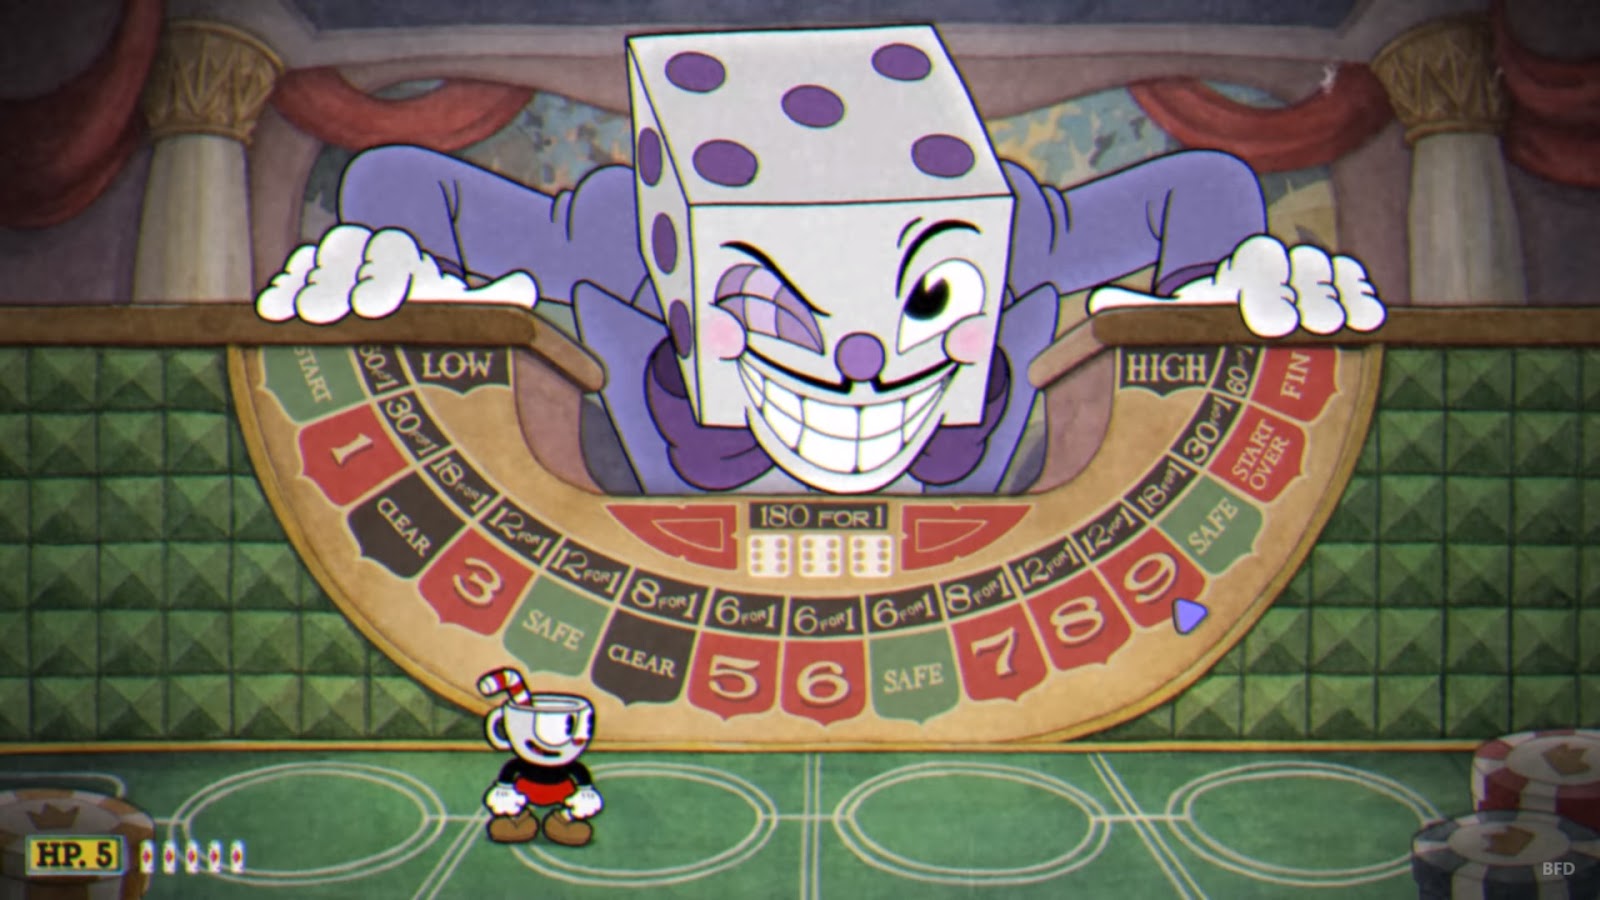 On A Roll - ORIGINAL CUPHEAD SWING SONG ft. King Dice & Devil by RecD 